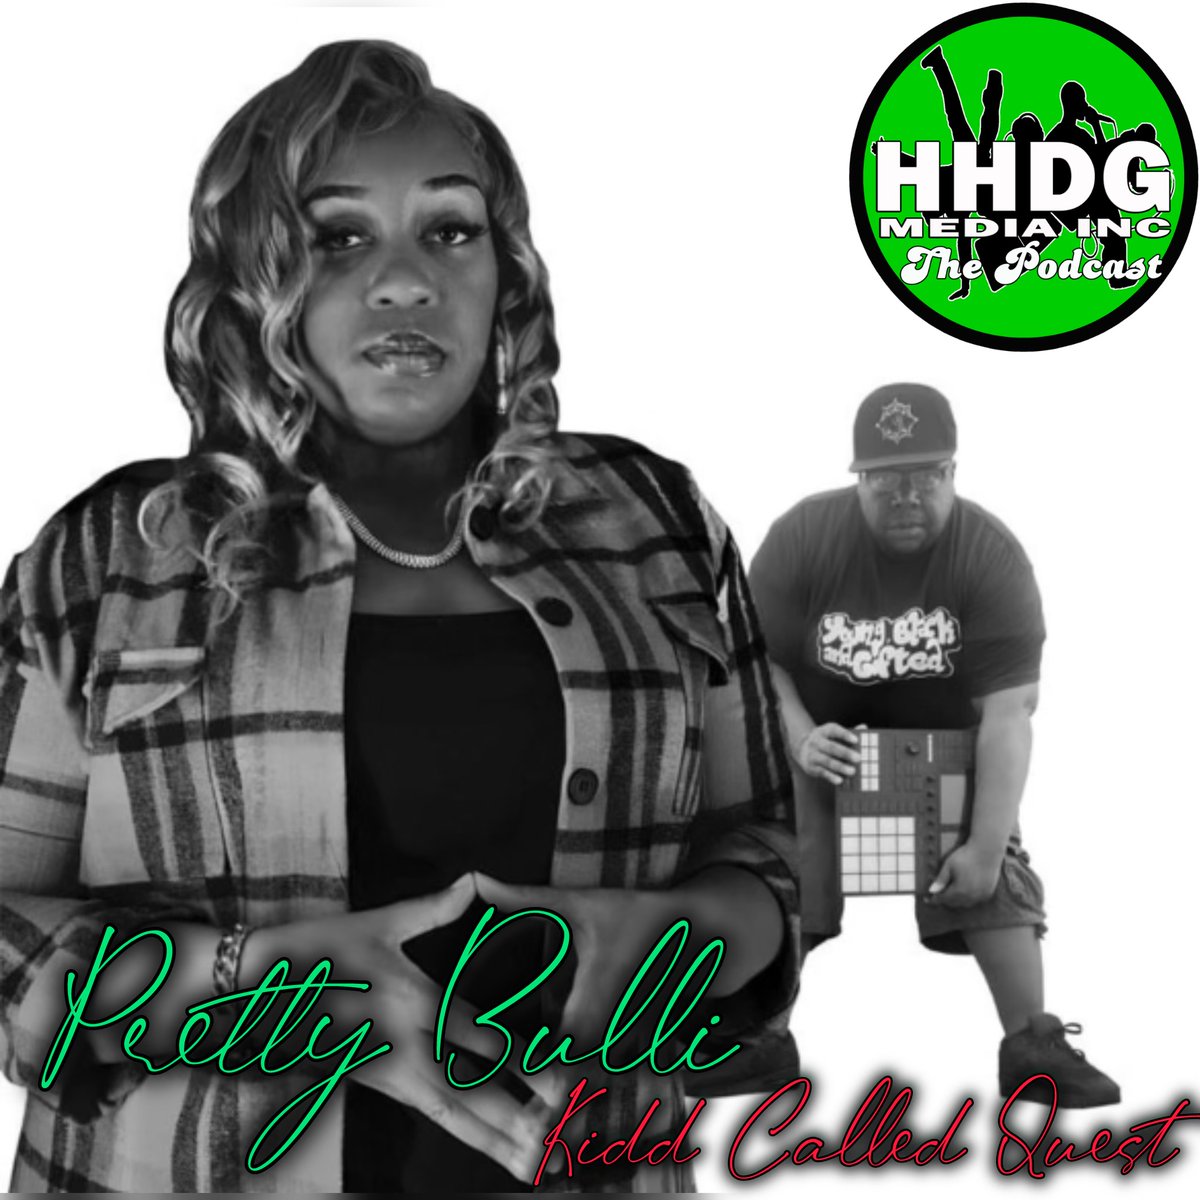 MONDAY 4/8/24 (9PM EST) ON @HHDGMediaInc THE PODCAST OUR GUEST IS @PrettyBulli & @KiddCalledQuest WATCH & COMMENT LIVE VIA YOUTUBE youtube.com/live/2MbCUqYyb… #PRETTYBULLI #KIDDCALLEDQUEST #THENANDNOW #BUFFALO #ROCHESTER #INTERVIEW #PODCAST #PRODUCER #EMCEE #XDECADE #HHDGMEDIAINC